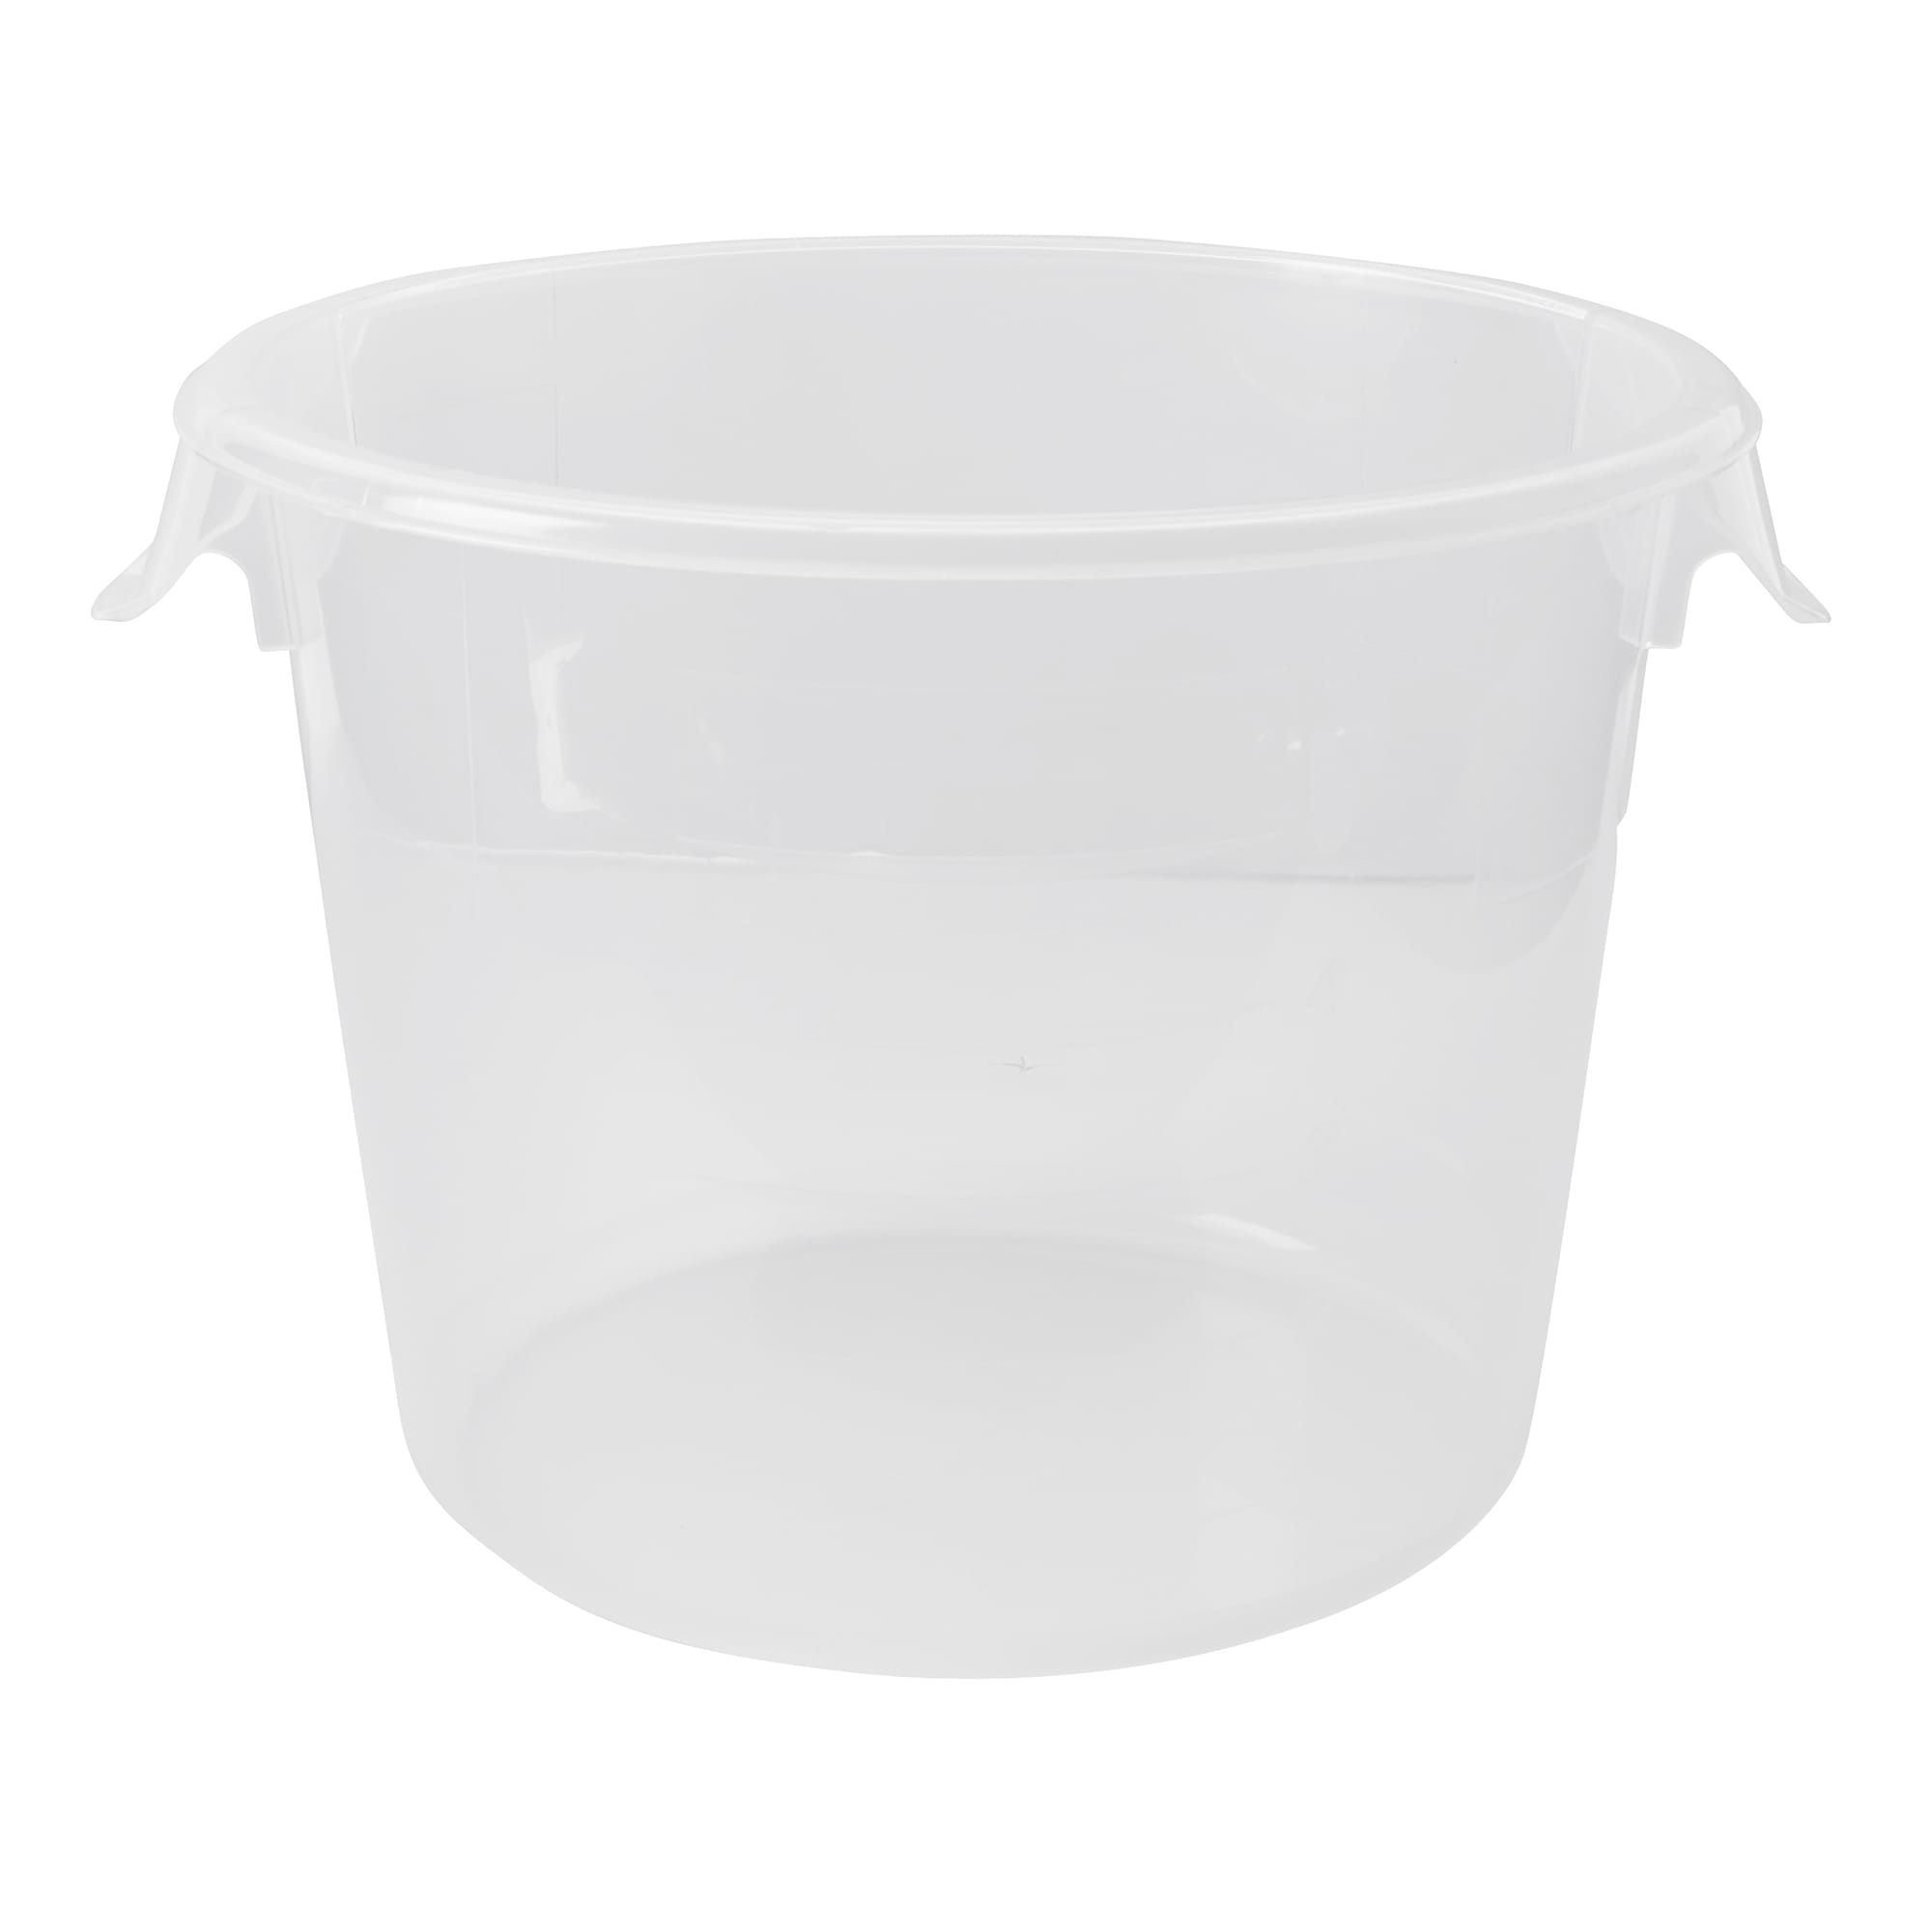 Rubbermaid Commercial Round Storage Containers, 6 qt, 10dia x 7 5/8h, Clear - image 1 of 2